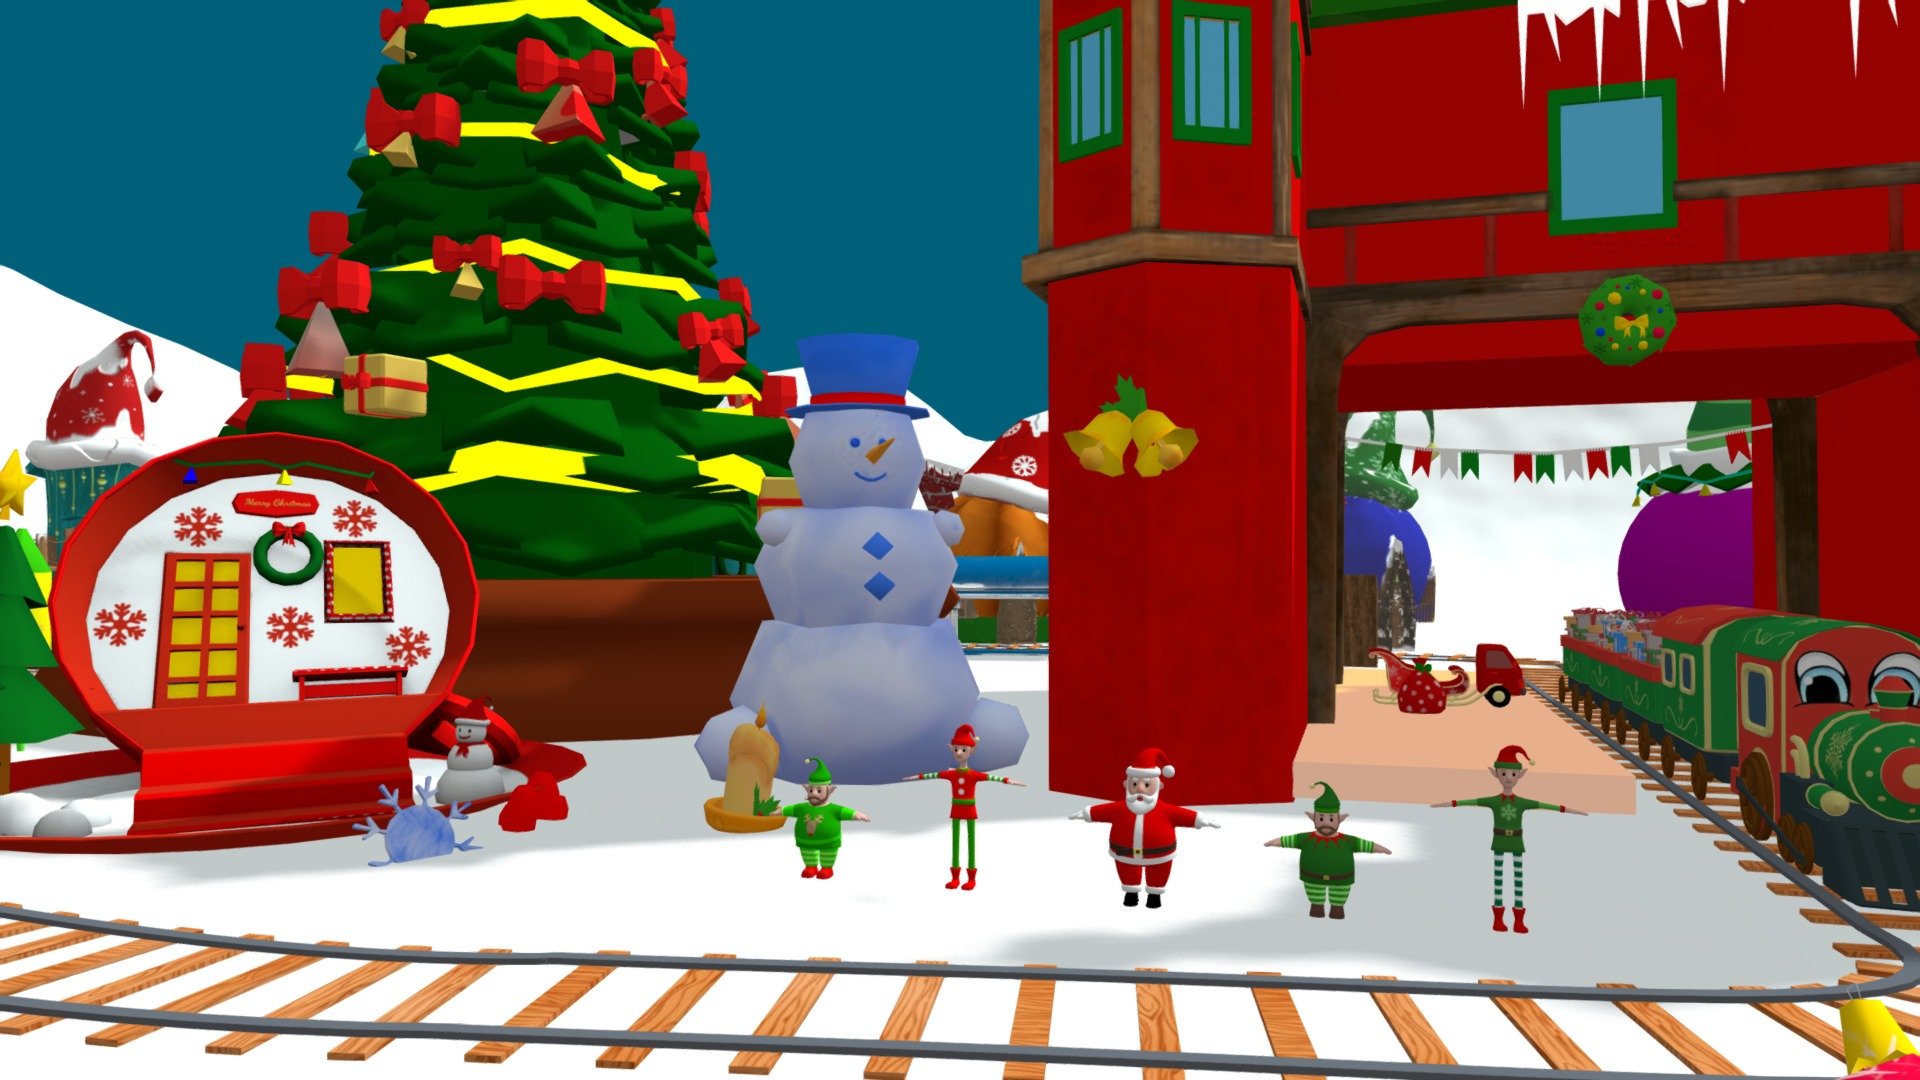 Christmas pack is a comprehensive, all-in-one gaming pack that includes everything you need to create a cartoon and magic immersive gaming world.


From Santa, Elves and magic train to buildings and environment assets, the Christmas pack has it all. With this pack, you can create your own winter wonderland right in Unity.

The Christmas pack contains:




A high-quality Santa model with festive textures

3 unique character models with 2 skin options

A detailed magic train with 4 carriages and associated props

12 complete buildings with multiple textures and style options

15 environmental assets including trees, gifts, Christmas socks etc.

This is a Bundle of Santa Claus and Elves Christmas Characters.

With this pack, you can create a festive gaming world that your players will love.  

We look forward to your feedback so we can create more assets for YOU!

Includes Files: FBX, Blender, DAE, OBJ, STL and Textures All - Christmas City Full Pack - Buy Royalty Free 3D model by HayqArt 3d model